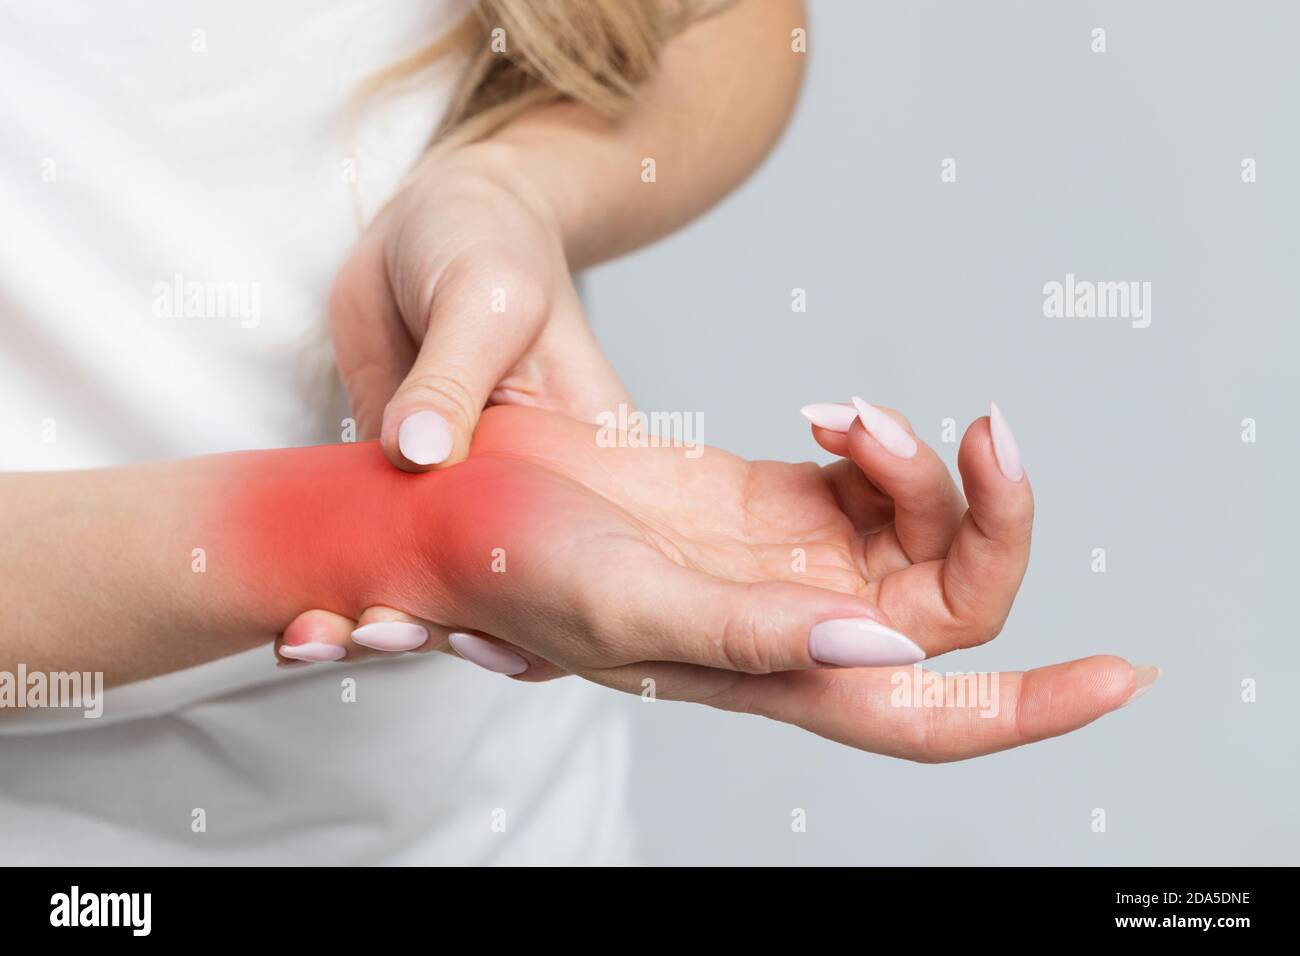 Closeup of female arm holding her painful wrist caused by prolonged work on the computer, laptop/Carpal tunnel syndrome, arthritis, neurological disea Stock Photo